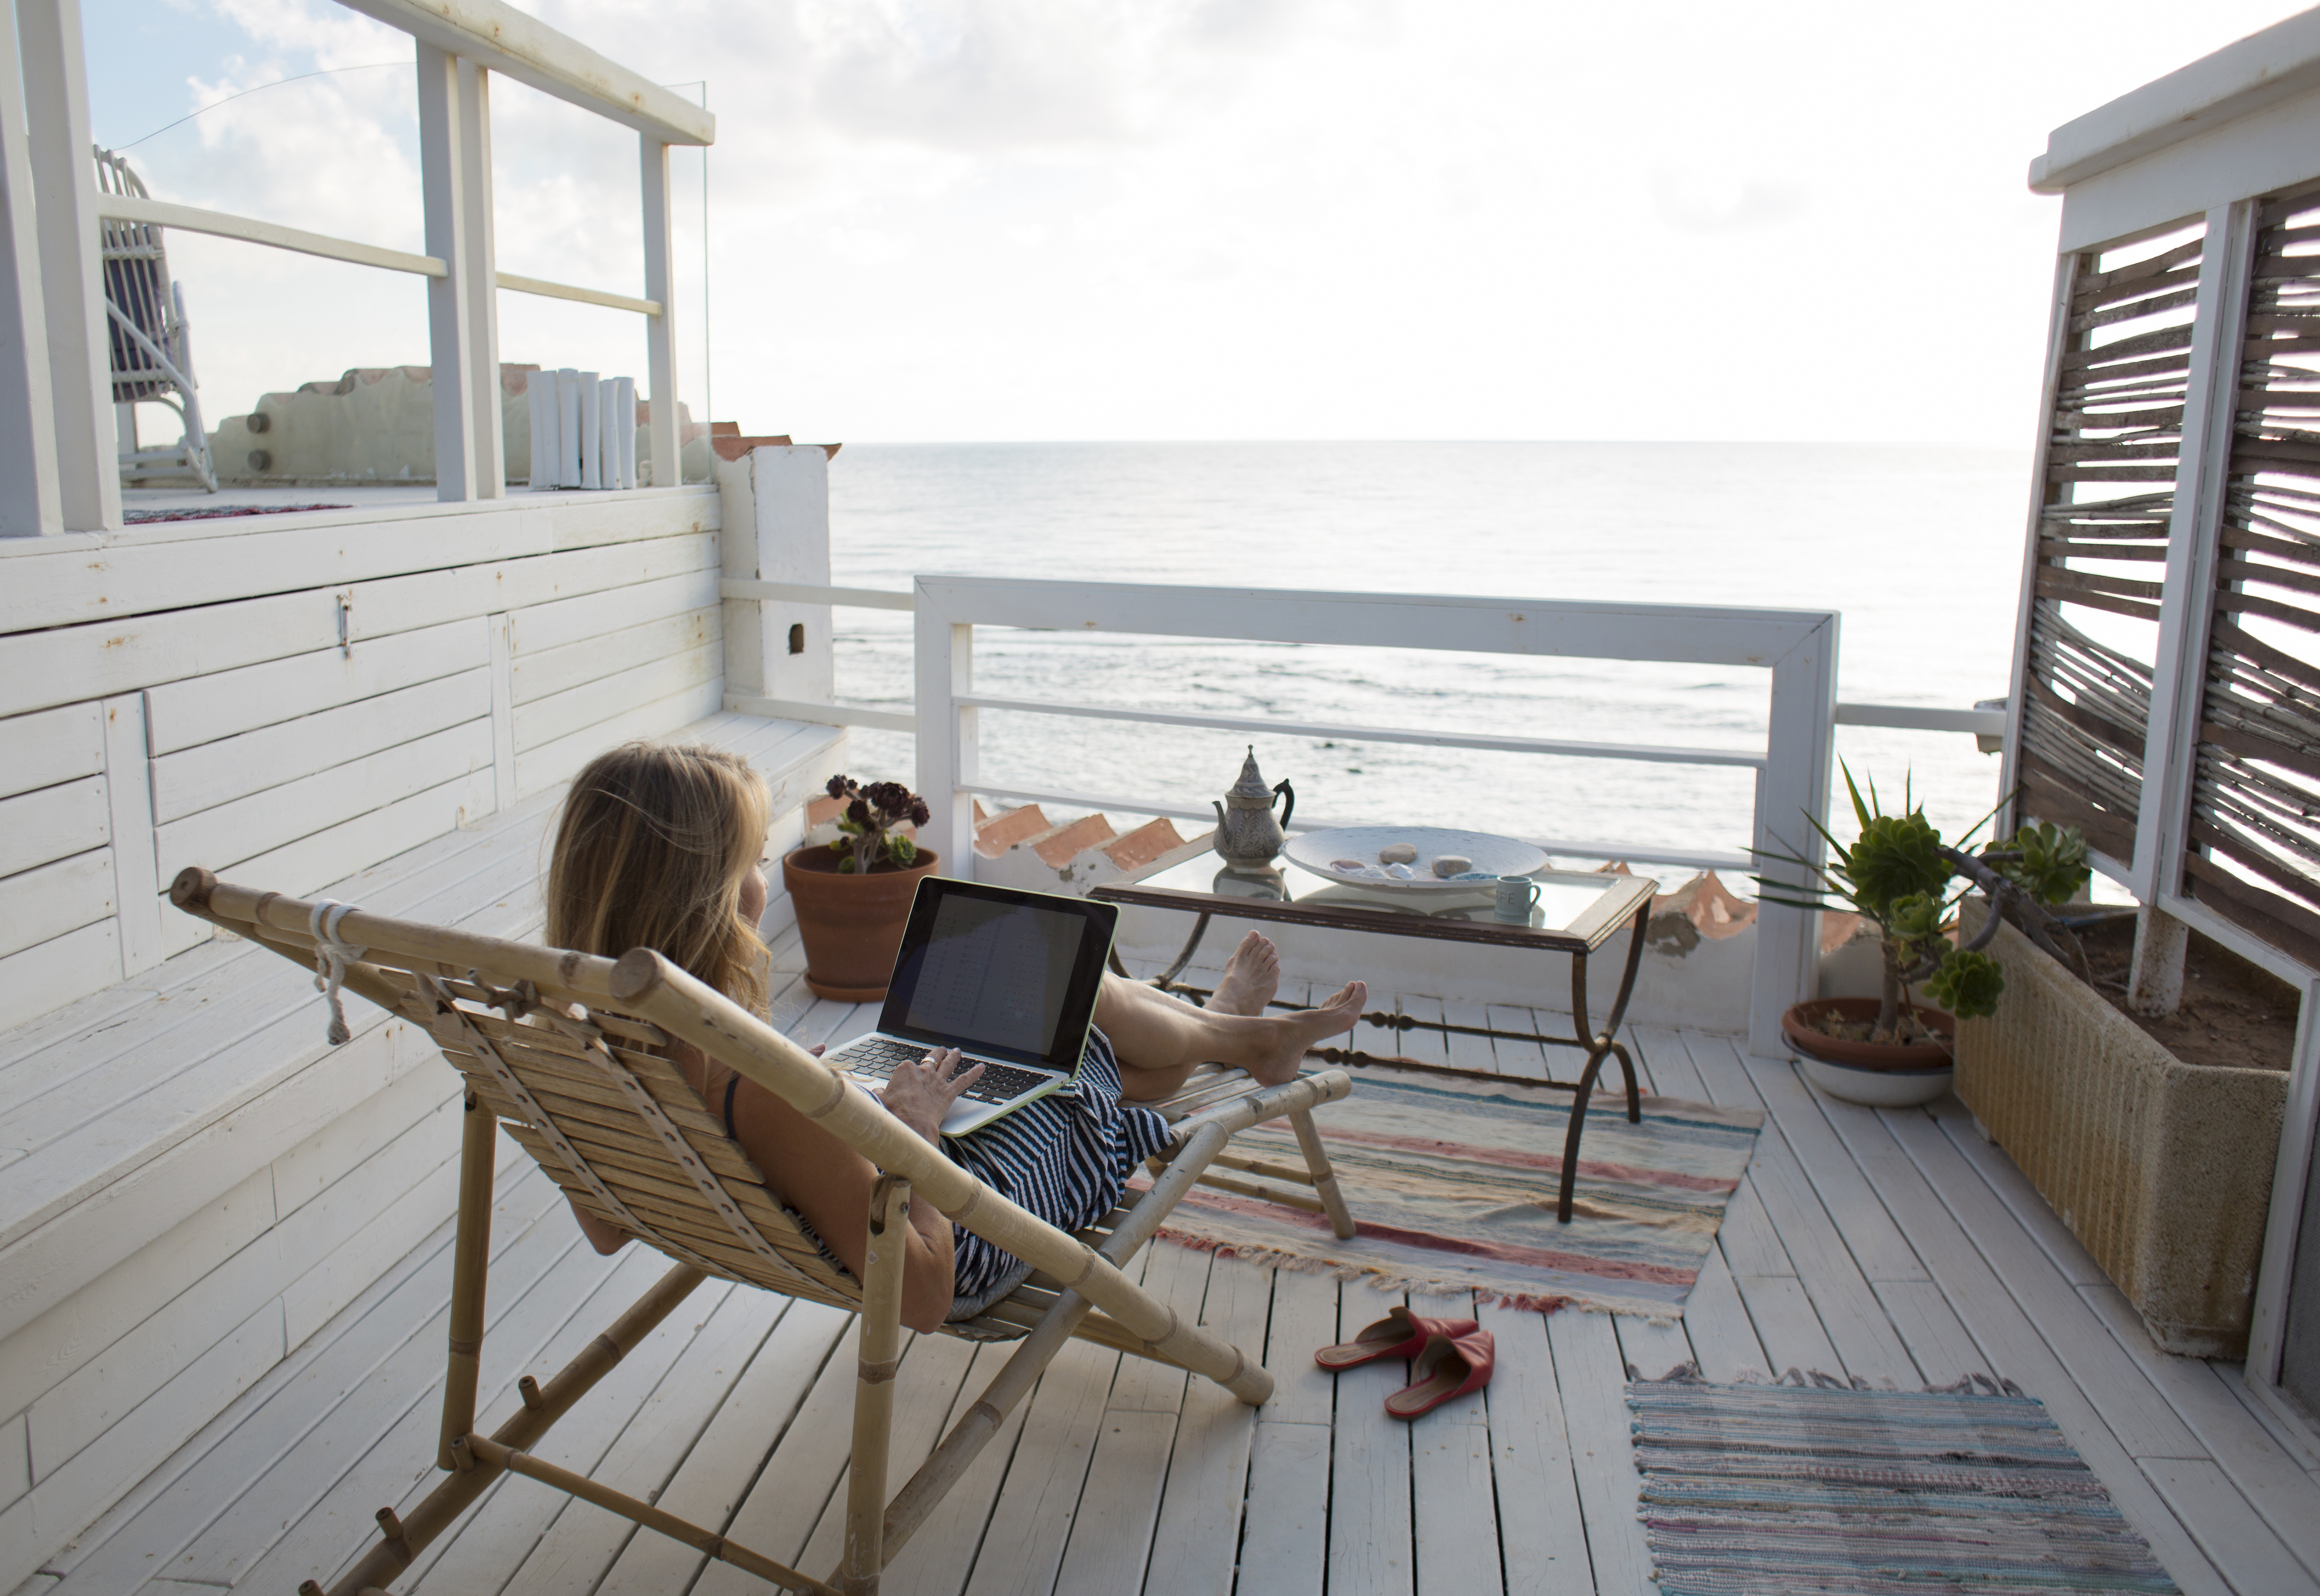 Person sitting outside on a porch overlooking the ocean while working on a laptop